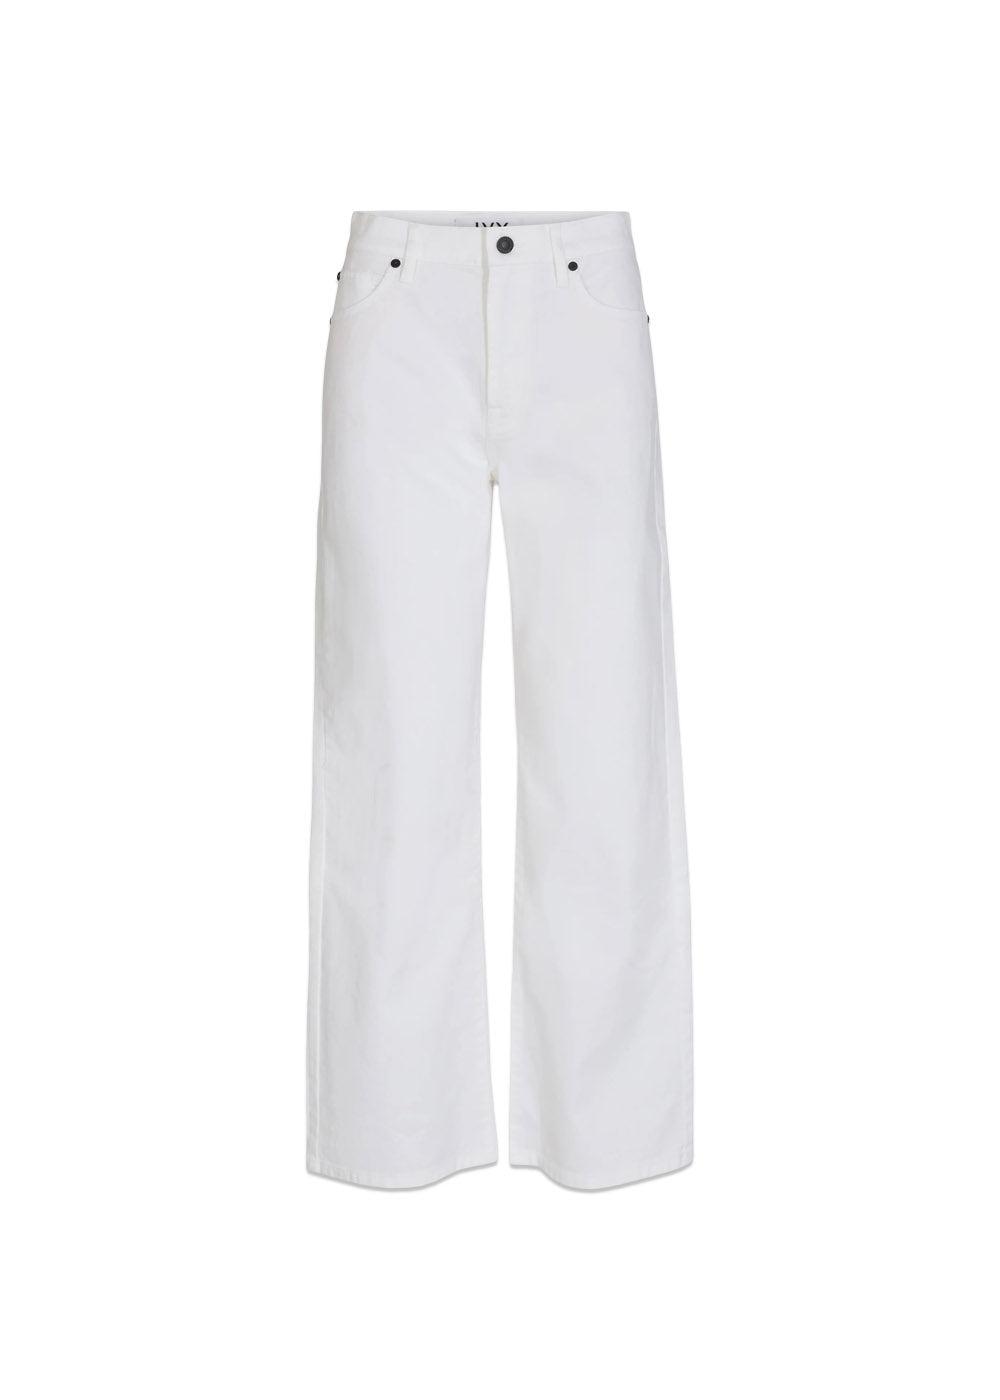 Ivy Copenhagens IVY-Mia Straight Jeans White - White. Køb jeans her.